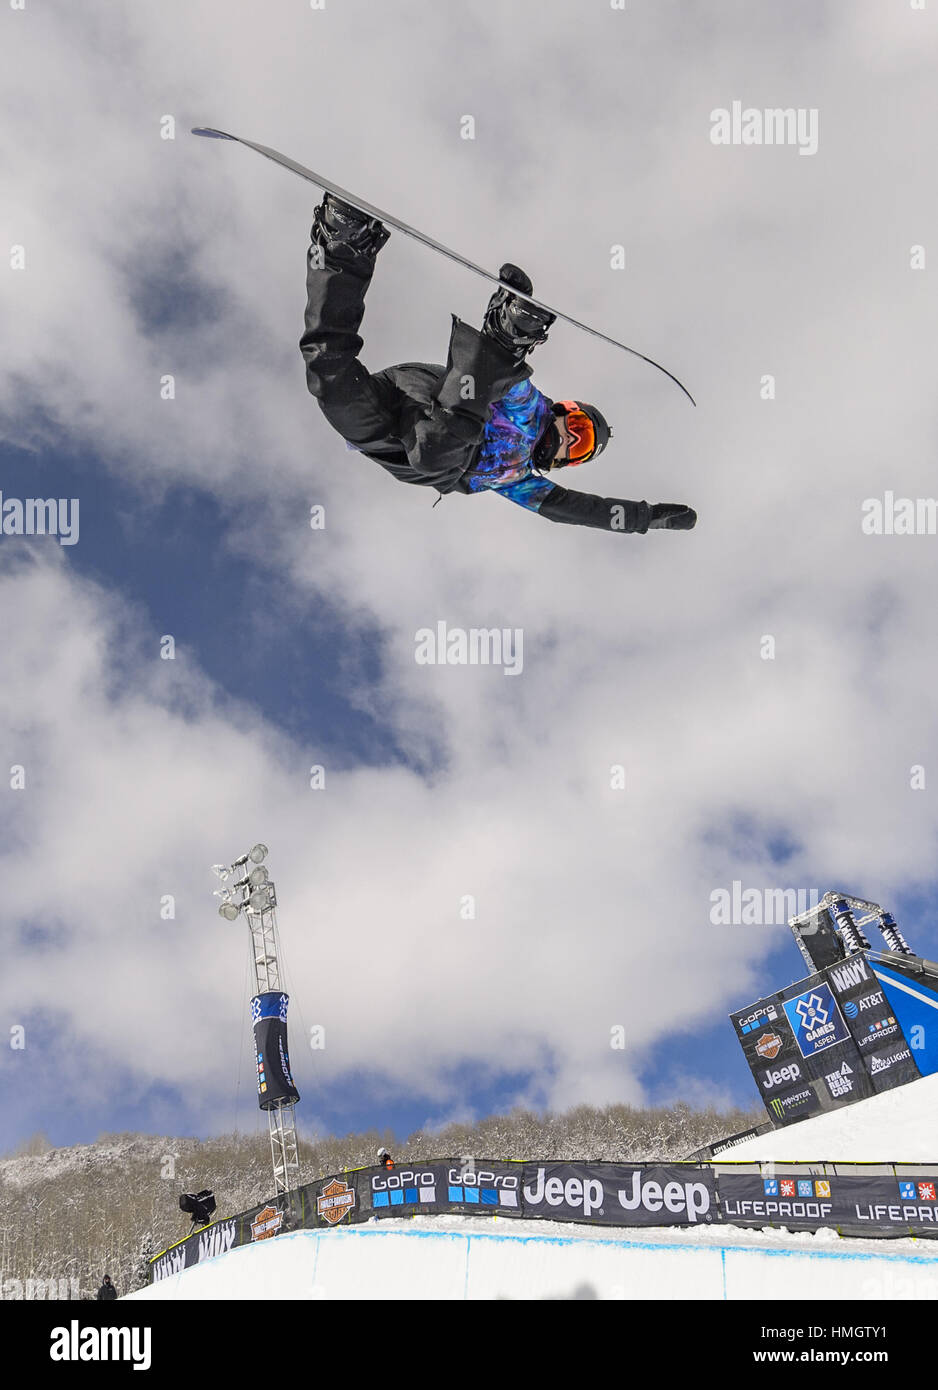 Aspen CO, USA. 26th Jan, 2017. ELENA HIGHT warms up for the women's snowboard halfpipe during Day 1 of Winter X Games 2017 at Colorado's Buttermilk Mountain. Credit: Marshall Foster/ZUMA Wire/Alamy Live News Stock Photo